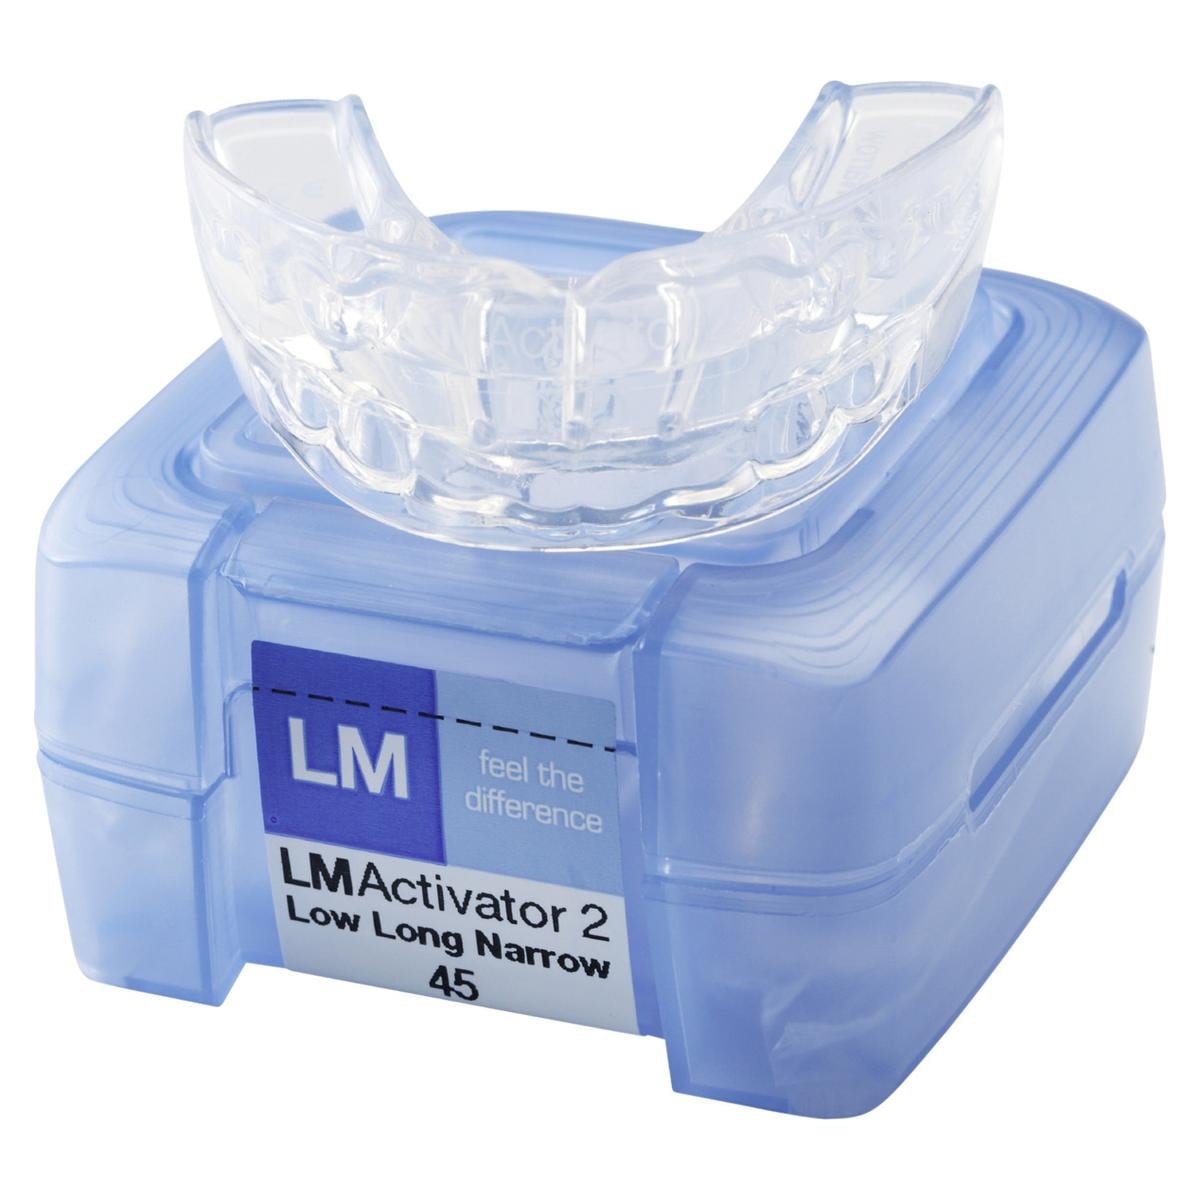 LM Activator 2 Low Long - Narrow - Size 40 (94250LLN)